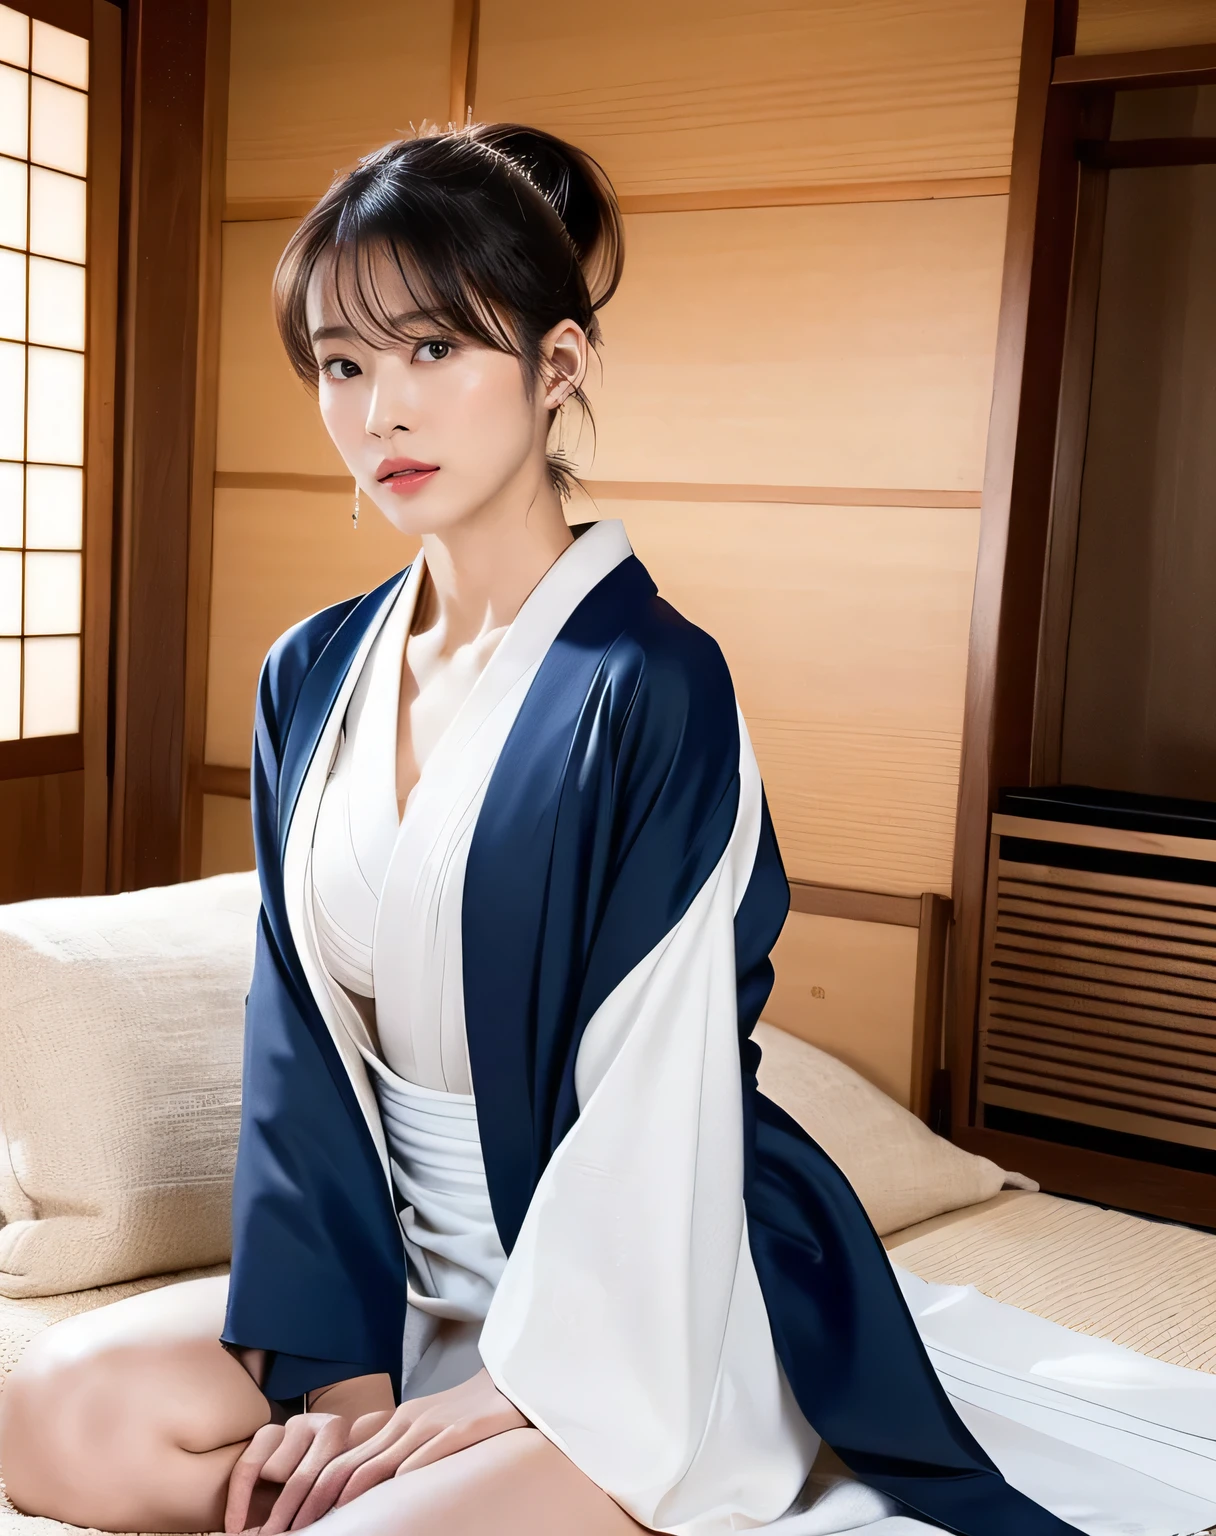 (kimono, Webbing, Complex Blue:1.4),
((highest quality, 8k, masterpiece: 1.3)), Perfect body beauty: 1.4, (Breast A cup:1.2), Small breasts, Round shaped breasts, Perfectly shaped breasts, Highly detailed face, Beautiful woman, (Dark brown shortcuts), Slim face, Highly detailed face and skin texture, Highly detailed lips, (Realistic:1.4),

((30 years old, Beautiful Married Woman:1.2)),

((Laying a white futon in a Japanese-style room, Sit on the futon with your legs stretched out:1.2)), 
((Dark room, Lantern:1.2)), 
((Blushing)),
((Breast enlargement,Flat Chest:1.2)),

Narrow shoulders, Long, slender legs, Thin waist, 
Ultra-detailed skin, Glossy Skin, Ultra detailed face, 
Ultra-detailed eyes, Slit eyes, Brown eyes, double eyelid, Beautiful thin eyebrows, Thin, long eyelashes, 
Ultra-detailed lips, Fuller lips, Glossy pink lips, Flushed Cheeks, White teeth, 
Beautiful actress&#39;s languid make-up, Pink lipstick, Smoky eyeshadow, Eye foundation, 
Dark brown hair, Delicate and soft hair, Hair blowing in the wind, 
(Elegantly putting your hair up, short hair, ponytail:1.5), Layered Cut, (Blunt bangs:1.2),
